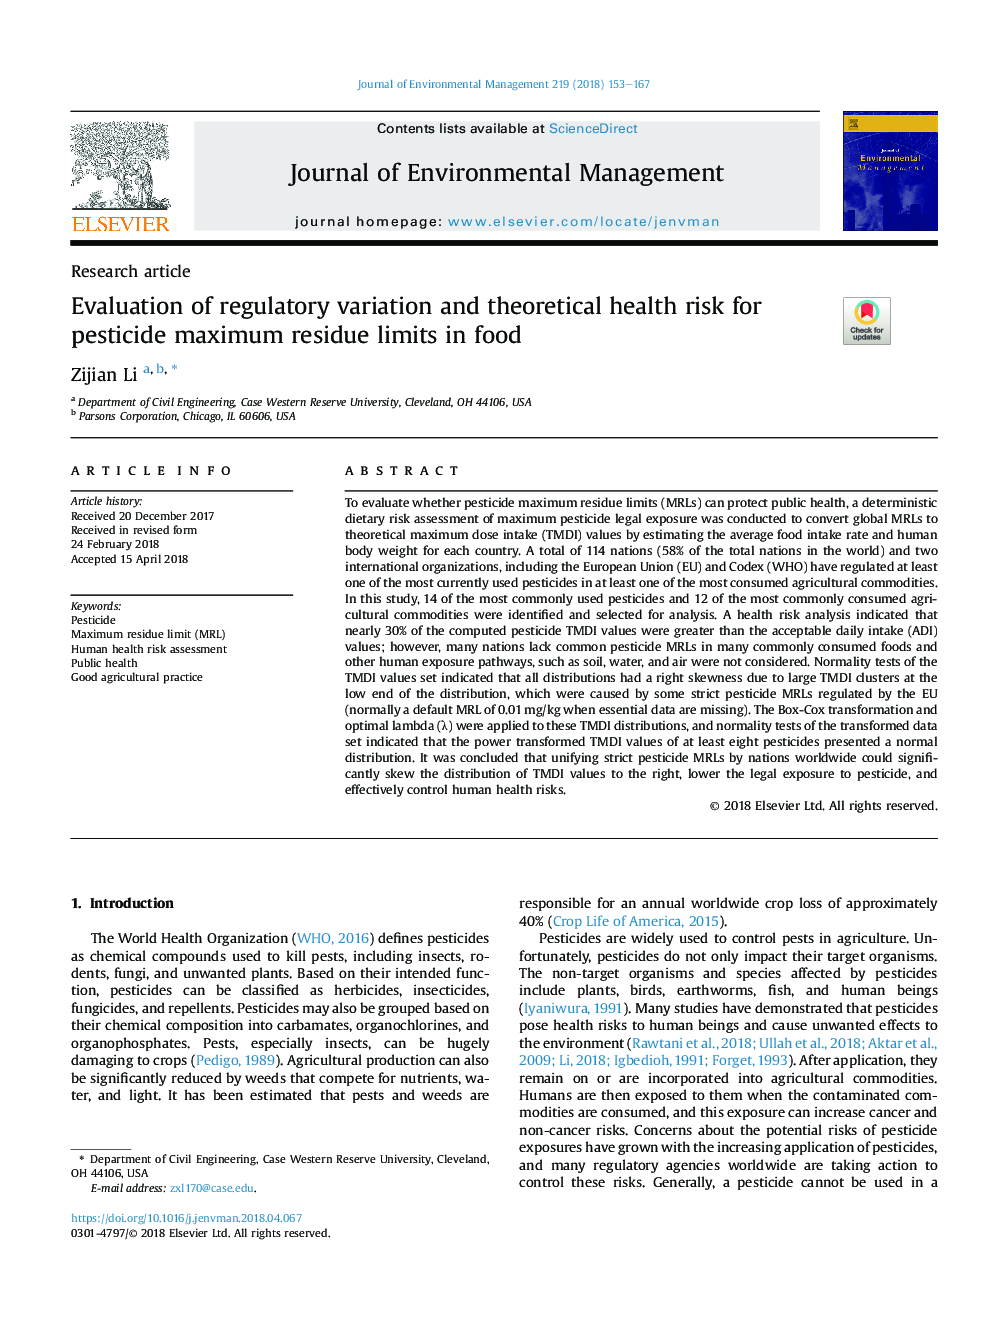 Evaluation of regulatory variation and theoretical health risk for pesticide maximum residue limits in food